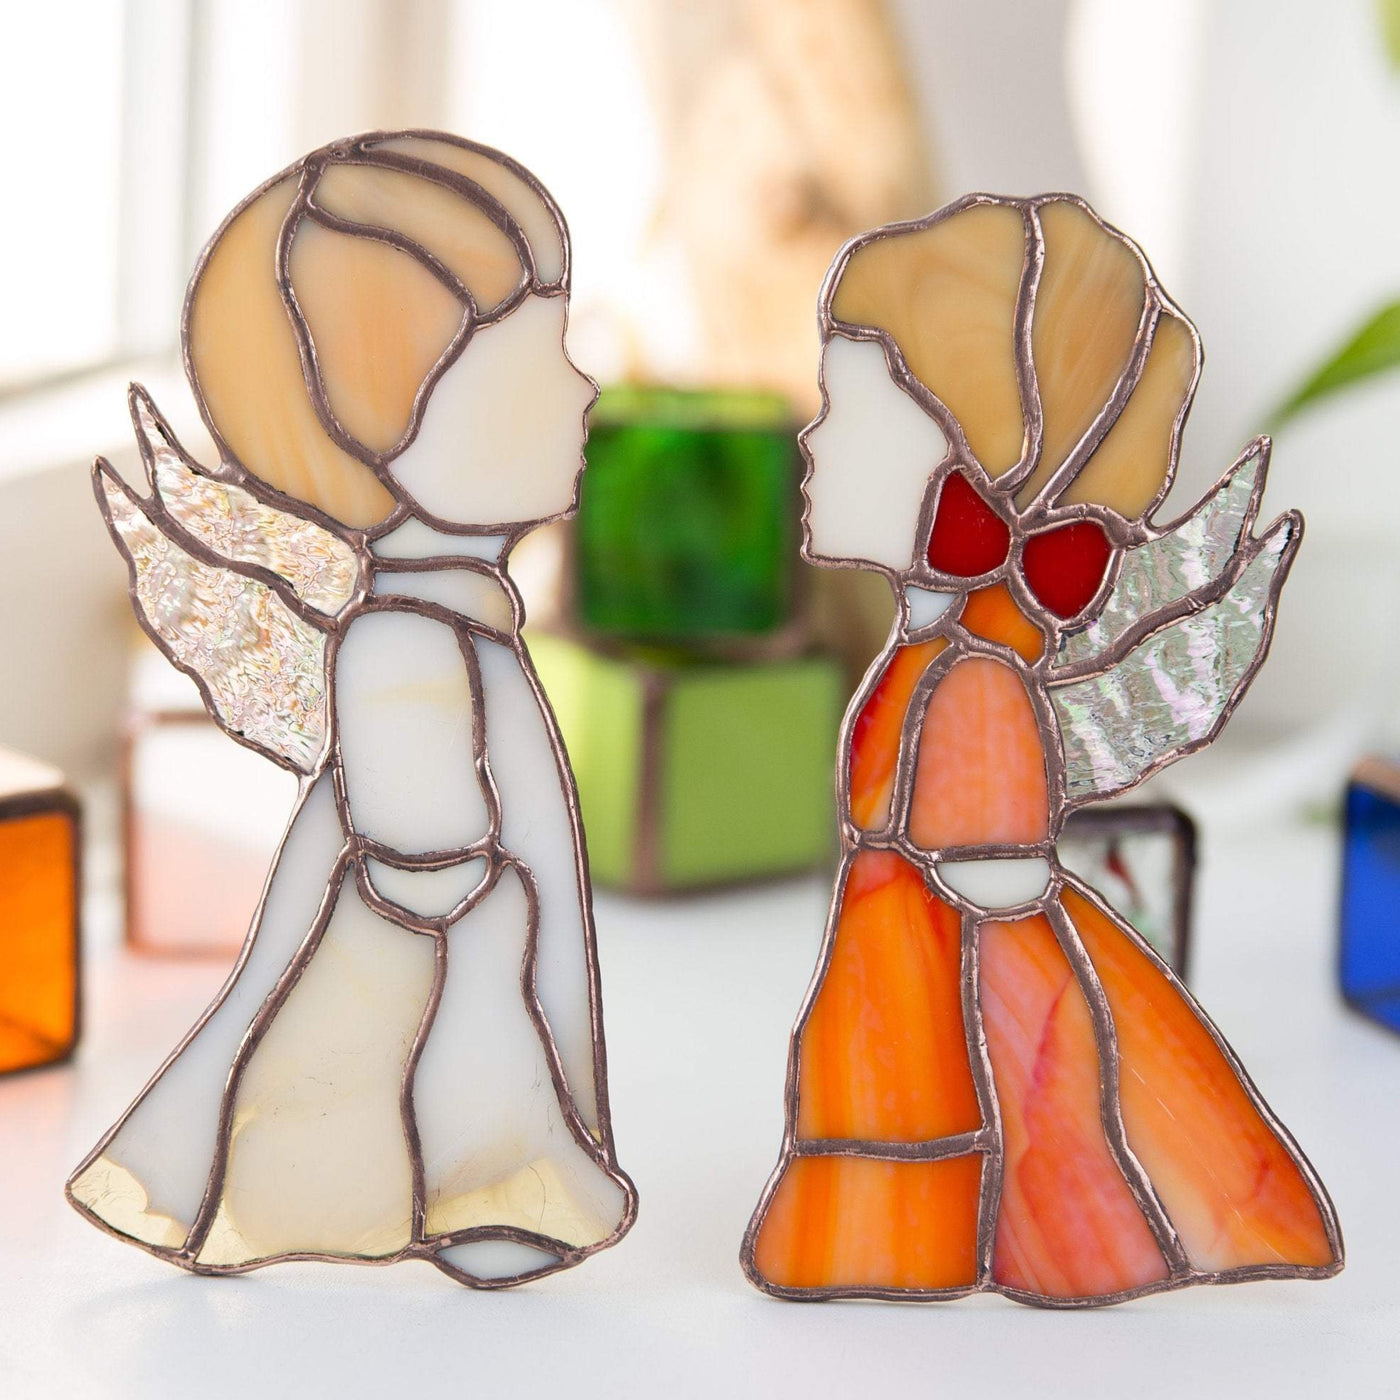 Stained glass beige angel boy and red angel girl window hangings